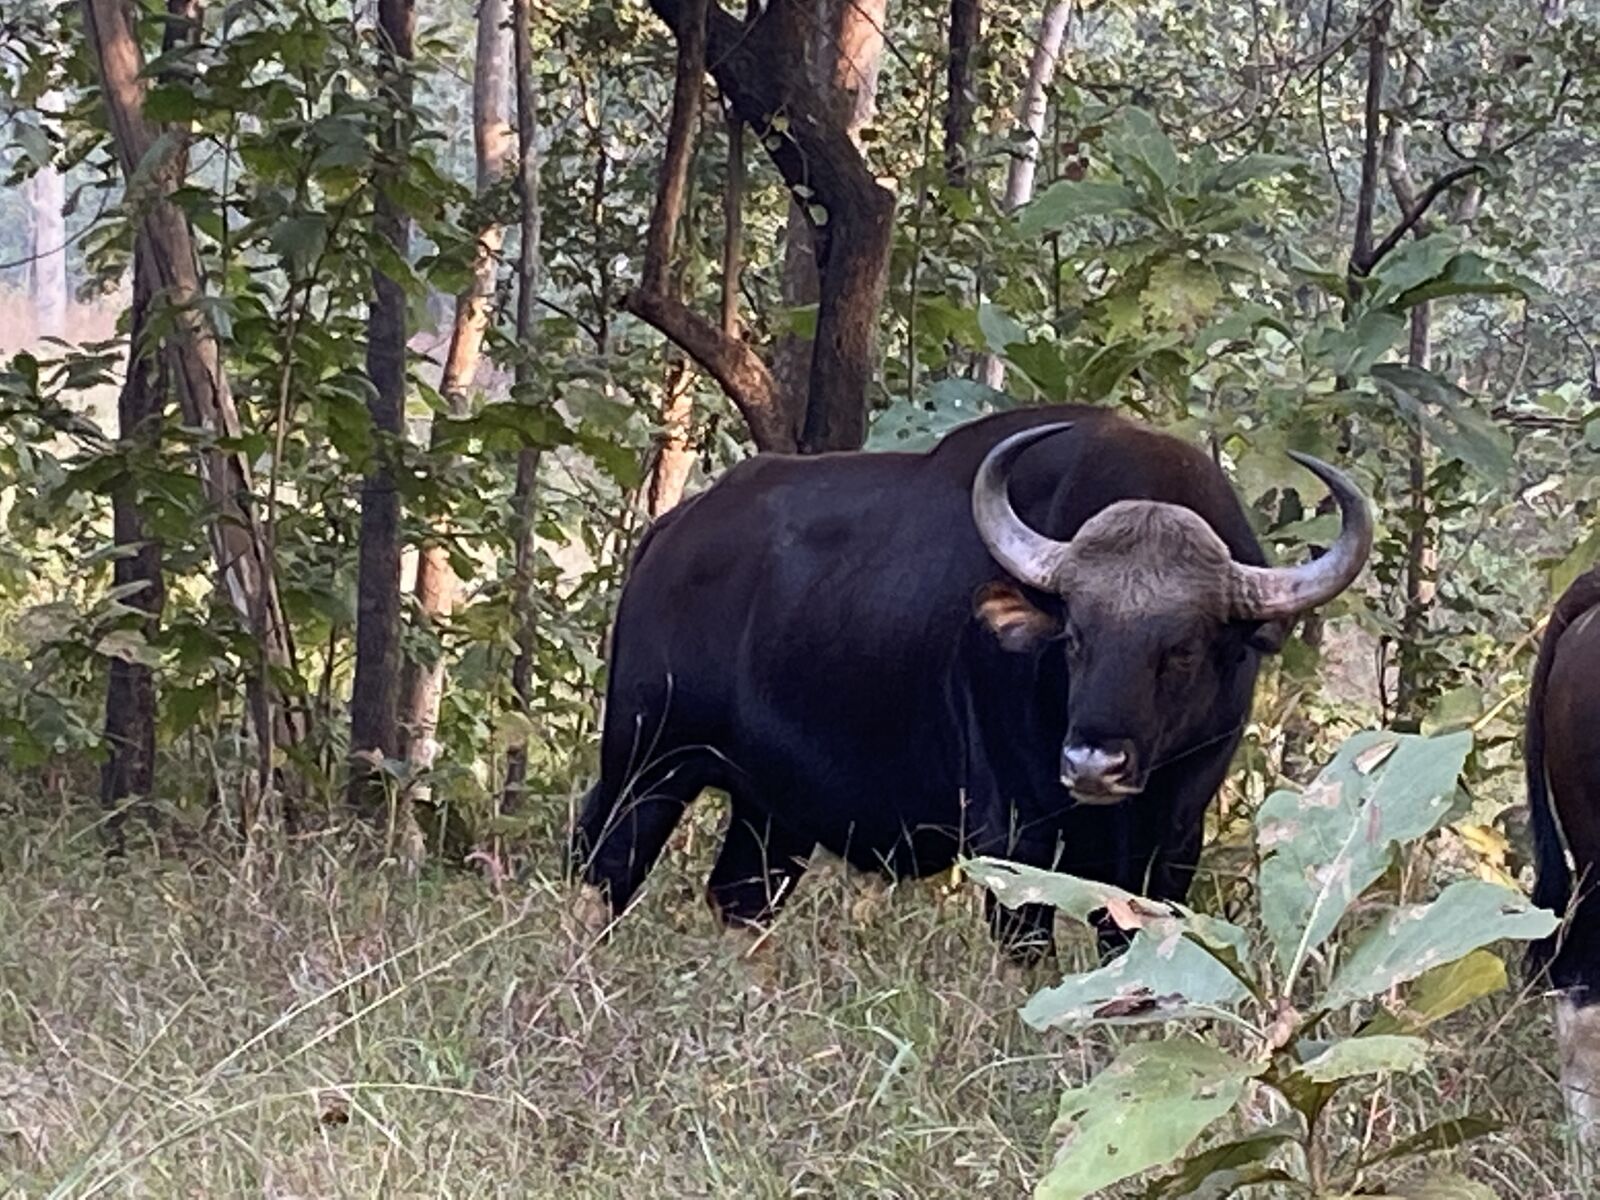 Apple iPhone 11 + iPhone 11 back dual wide camera 4.25mm f/1.8 sample photo. Male bison fully grown photography